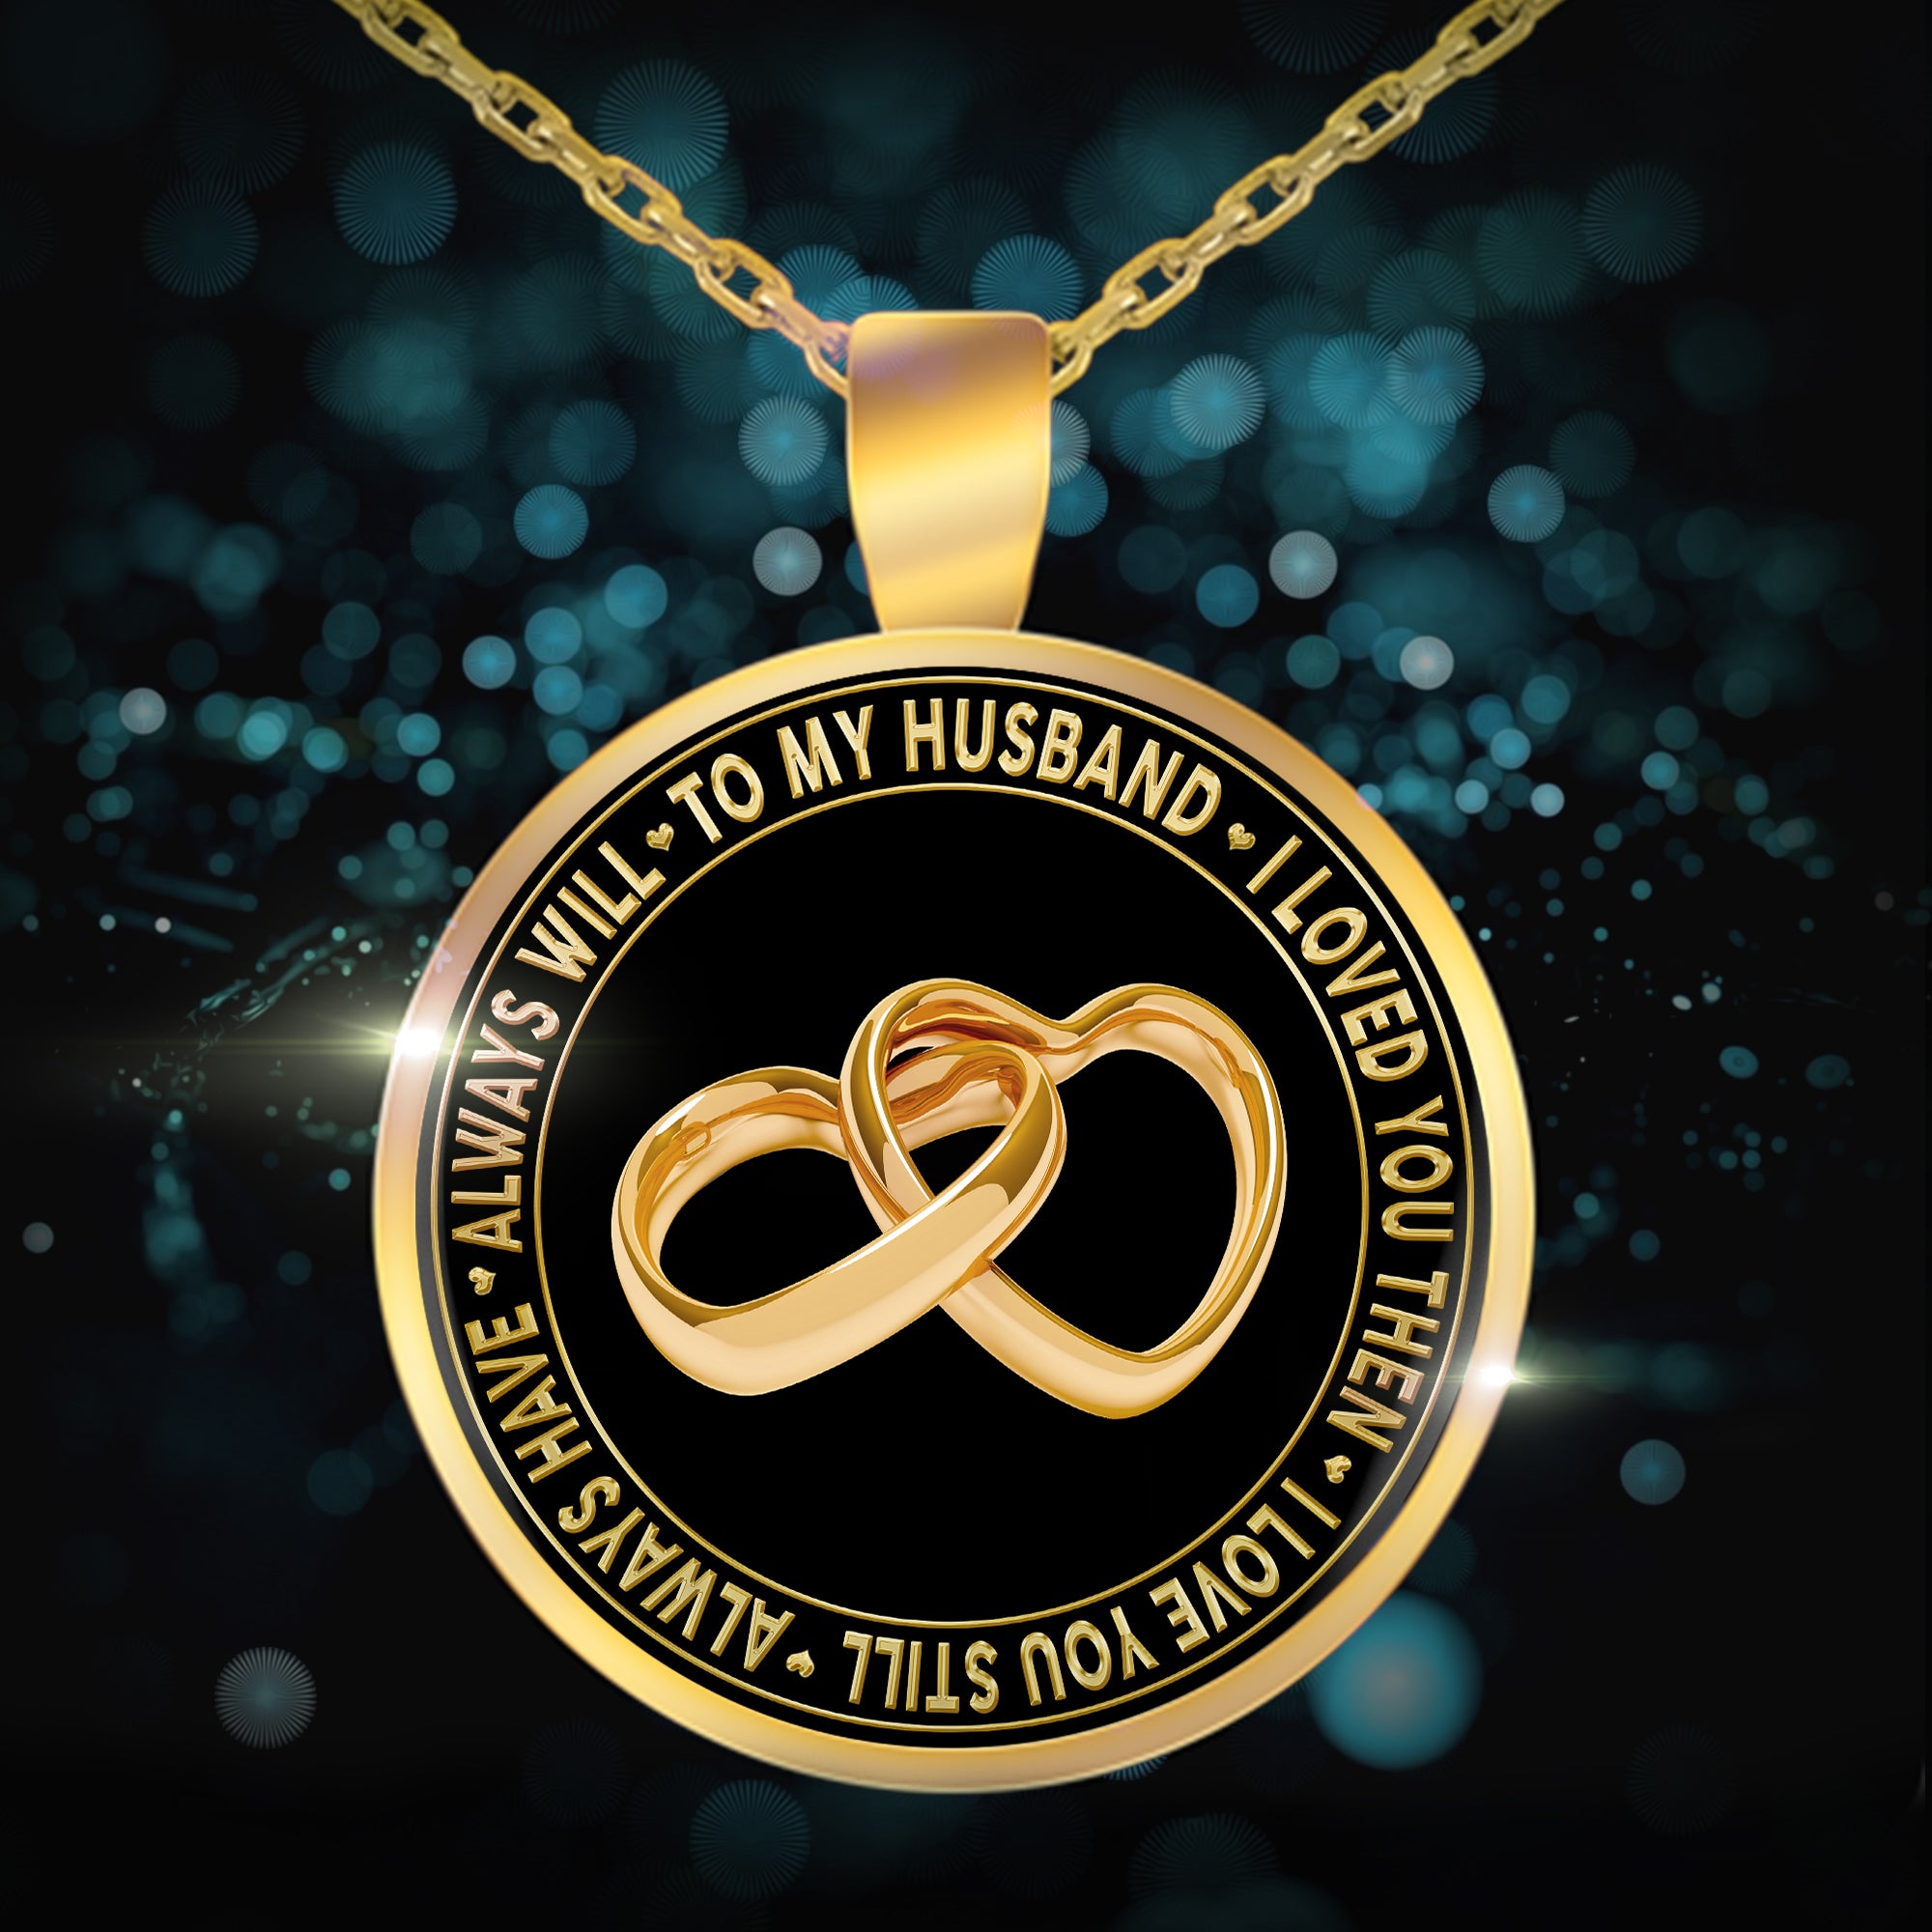 To My Husband - "I Love You Always" Gold Pendant Necklace